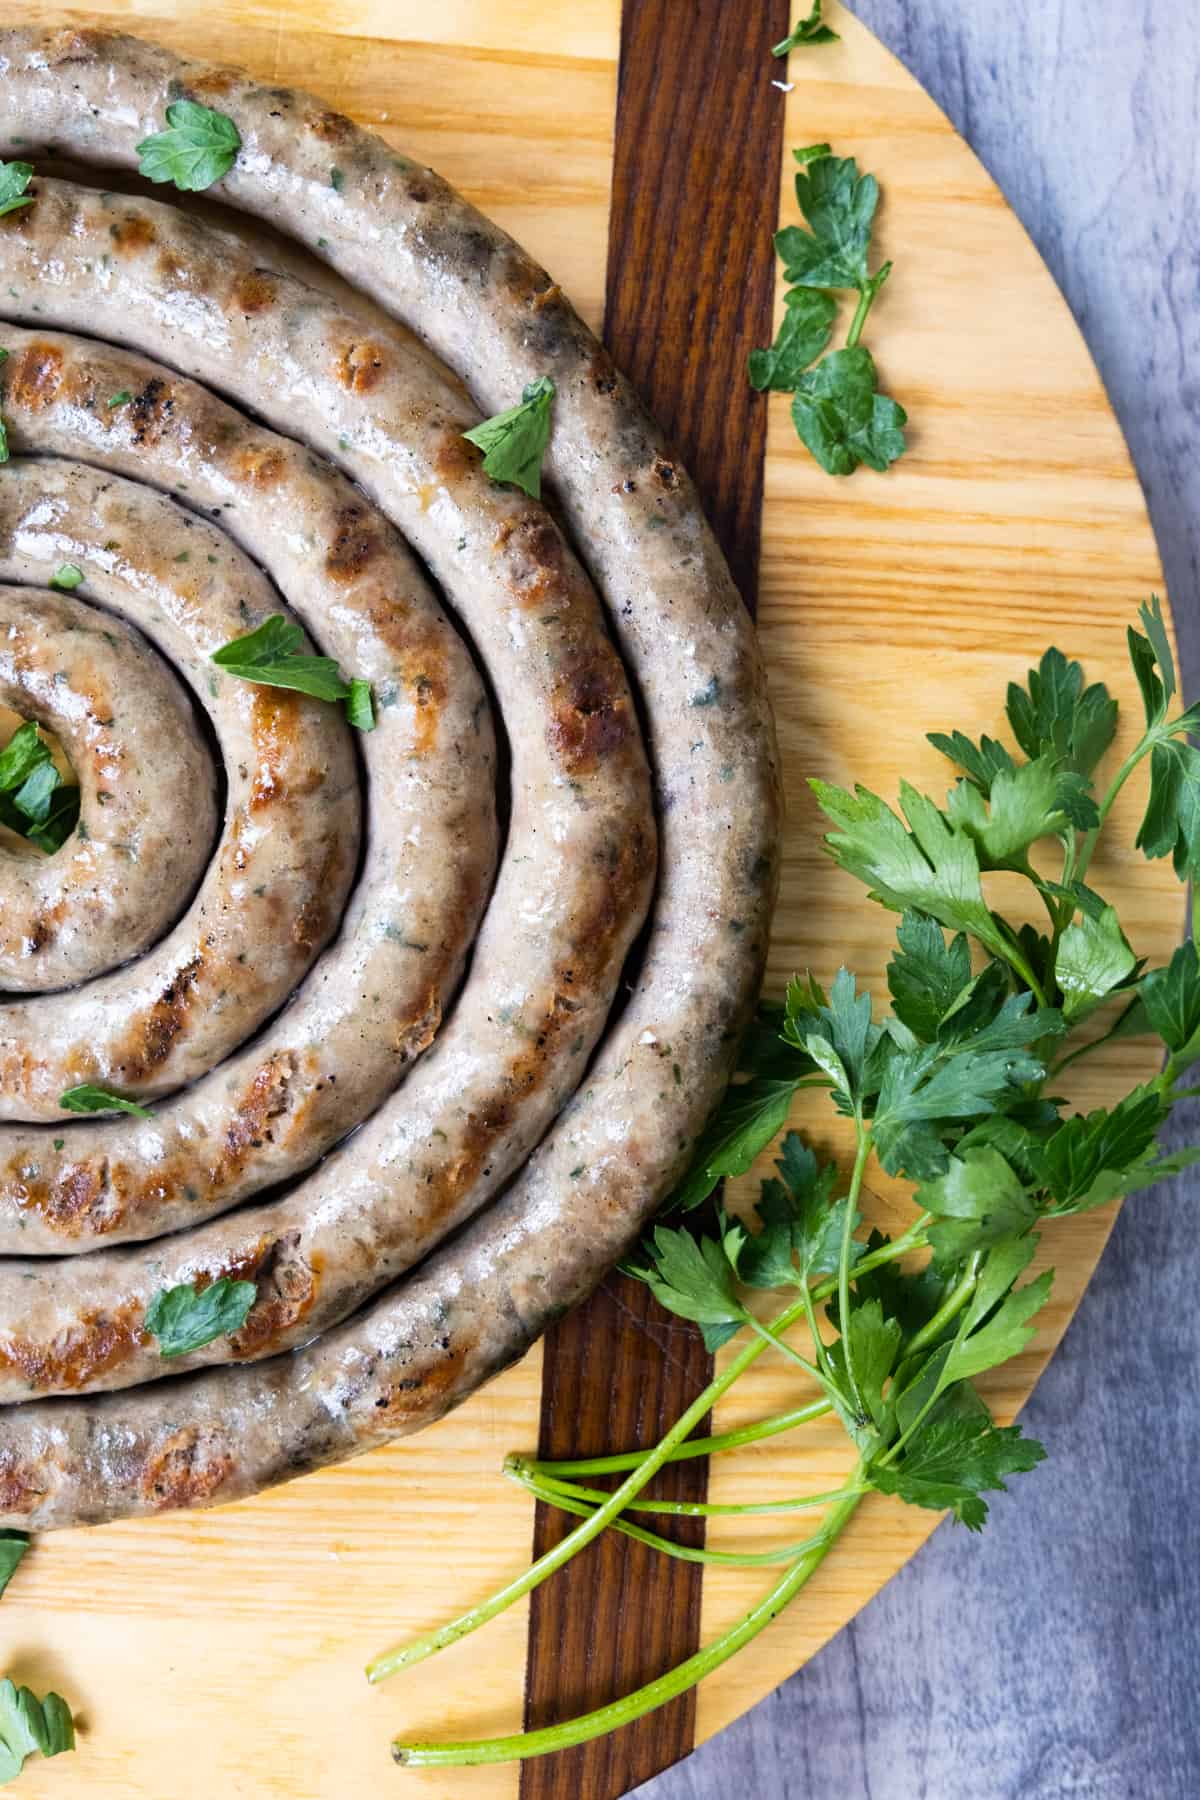 Grilled Sausage - How to Grill Sausage Perfectly Every Time!